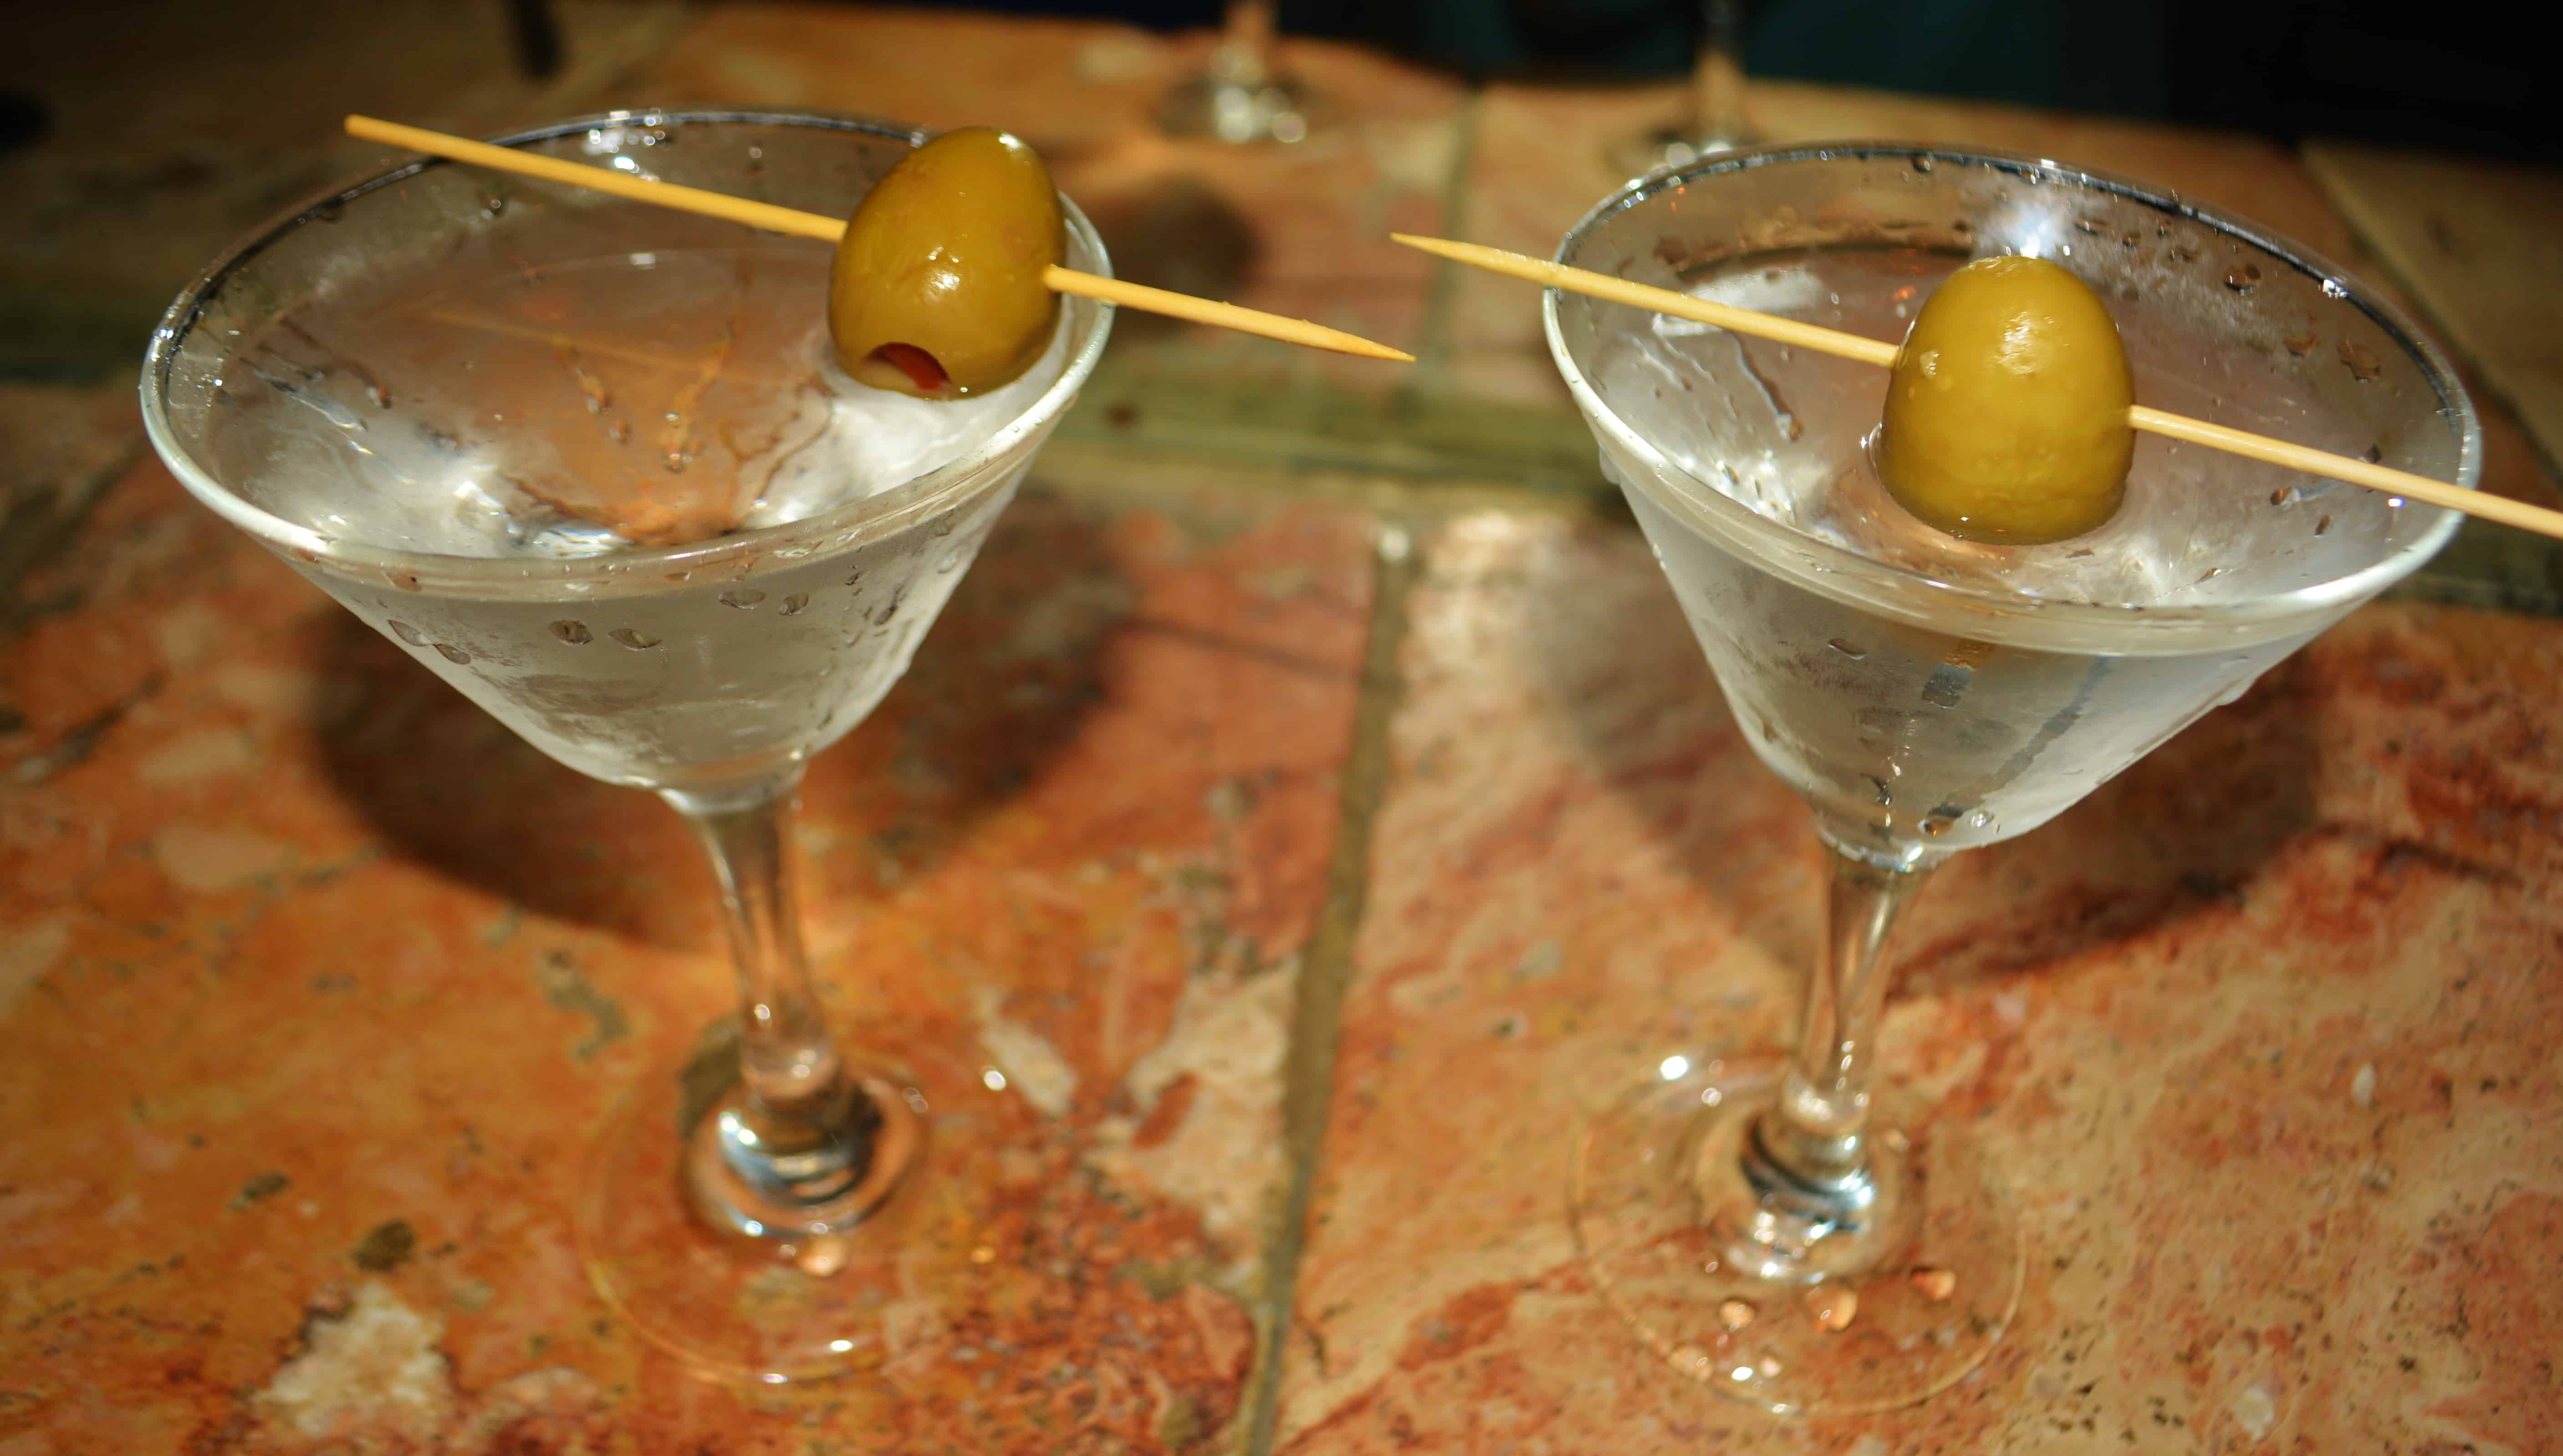 Classic Martini anyone? From Melvyn's Palm Springs